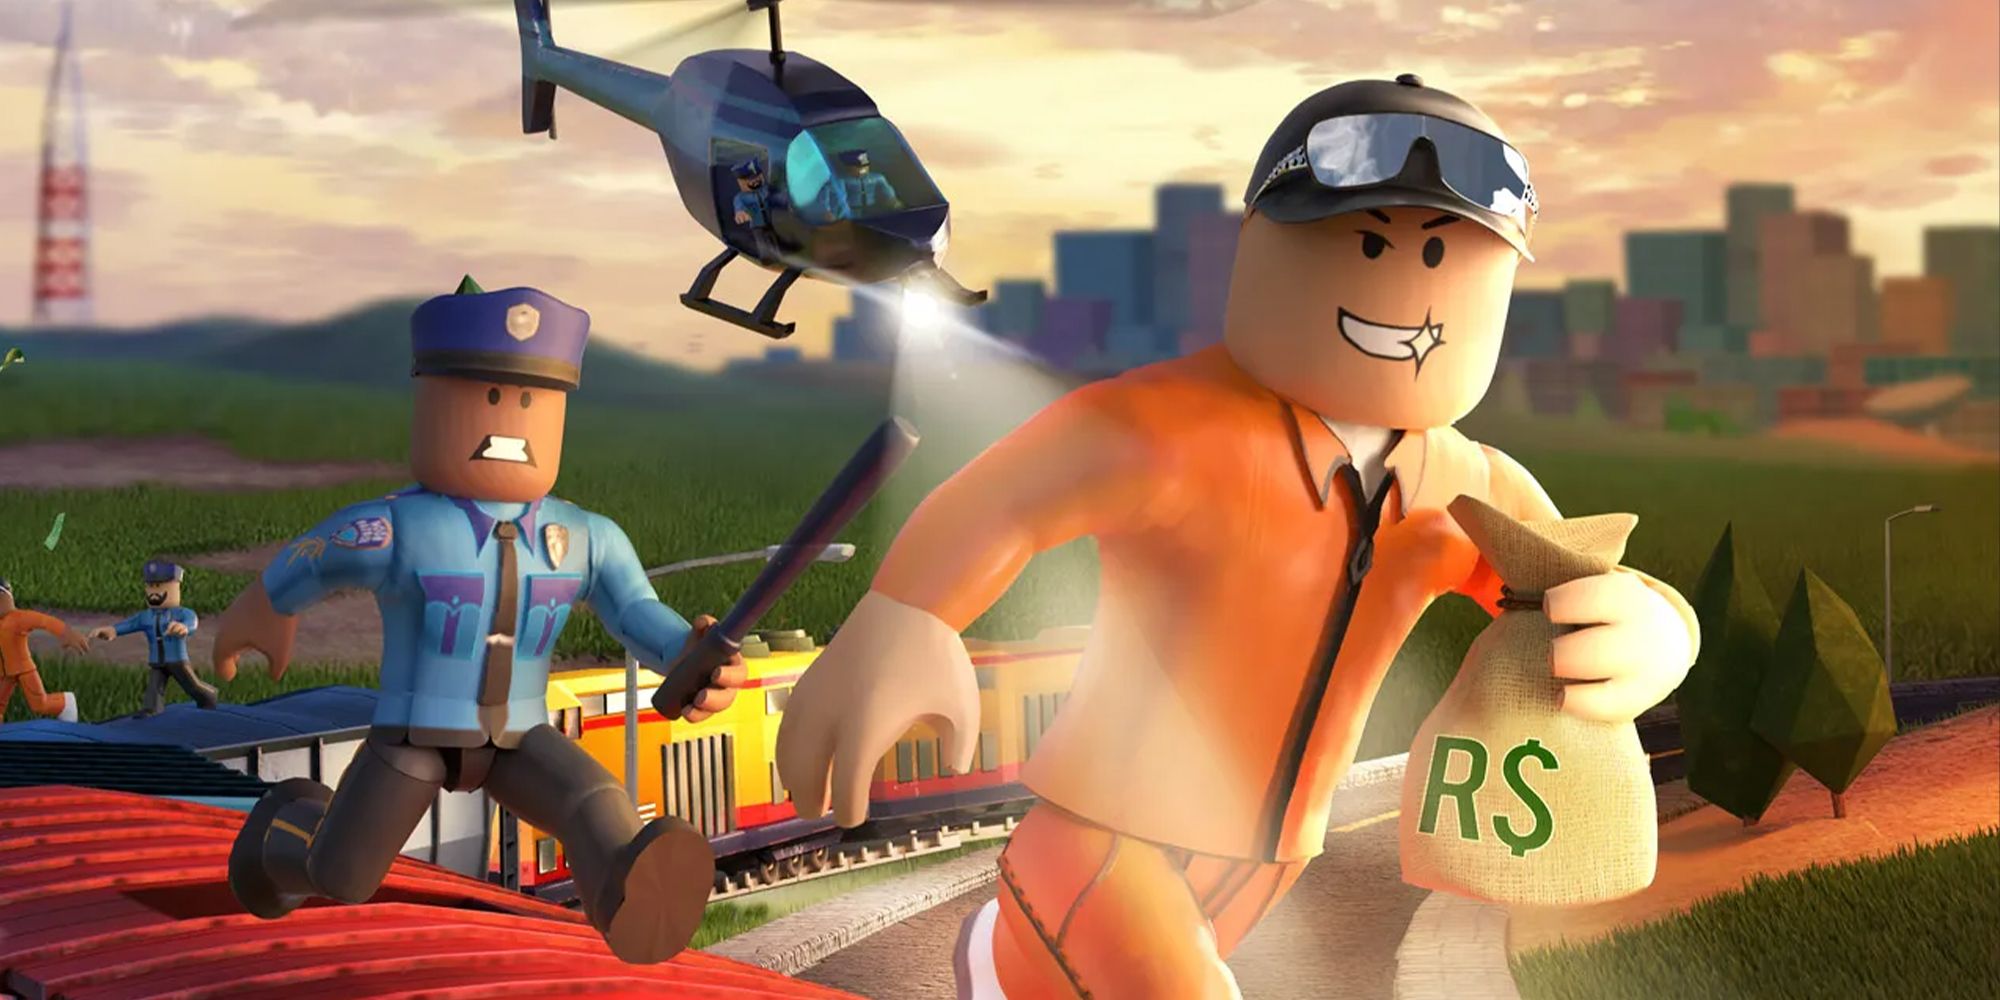 Every Available Coupon Code in Roblox (August 2021)